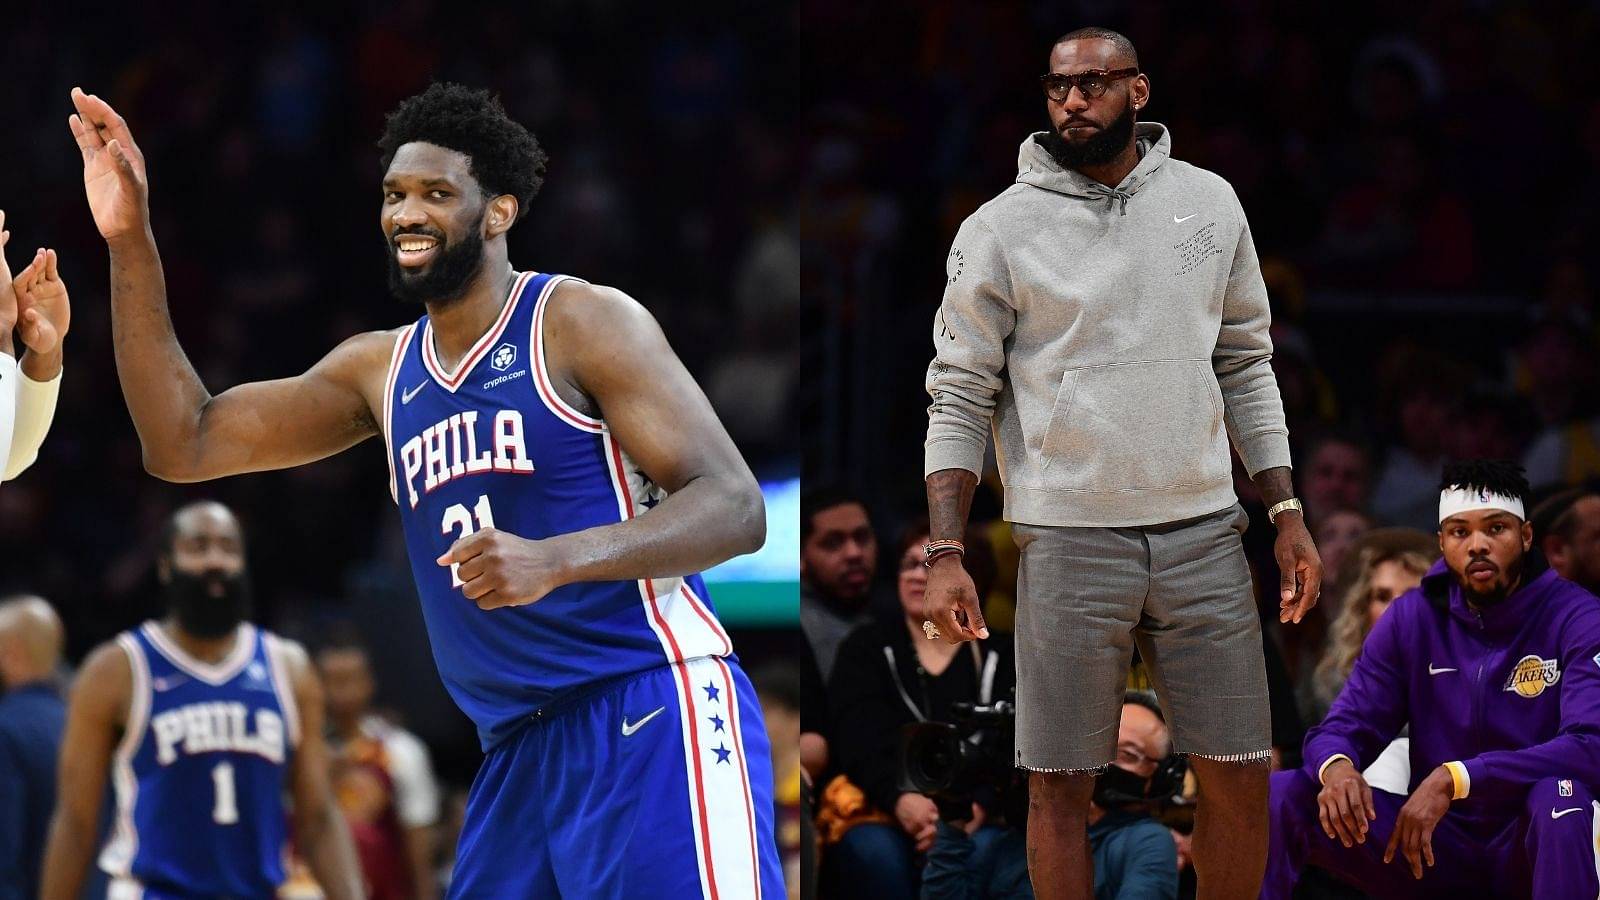 "Hey, LeBron James! Guess who is leading the league in scoring now?": Joel Embiid takes over Lakers superstar with a monstrous 45-point night against the Pacers